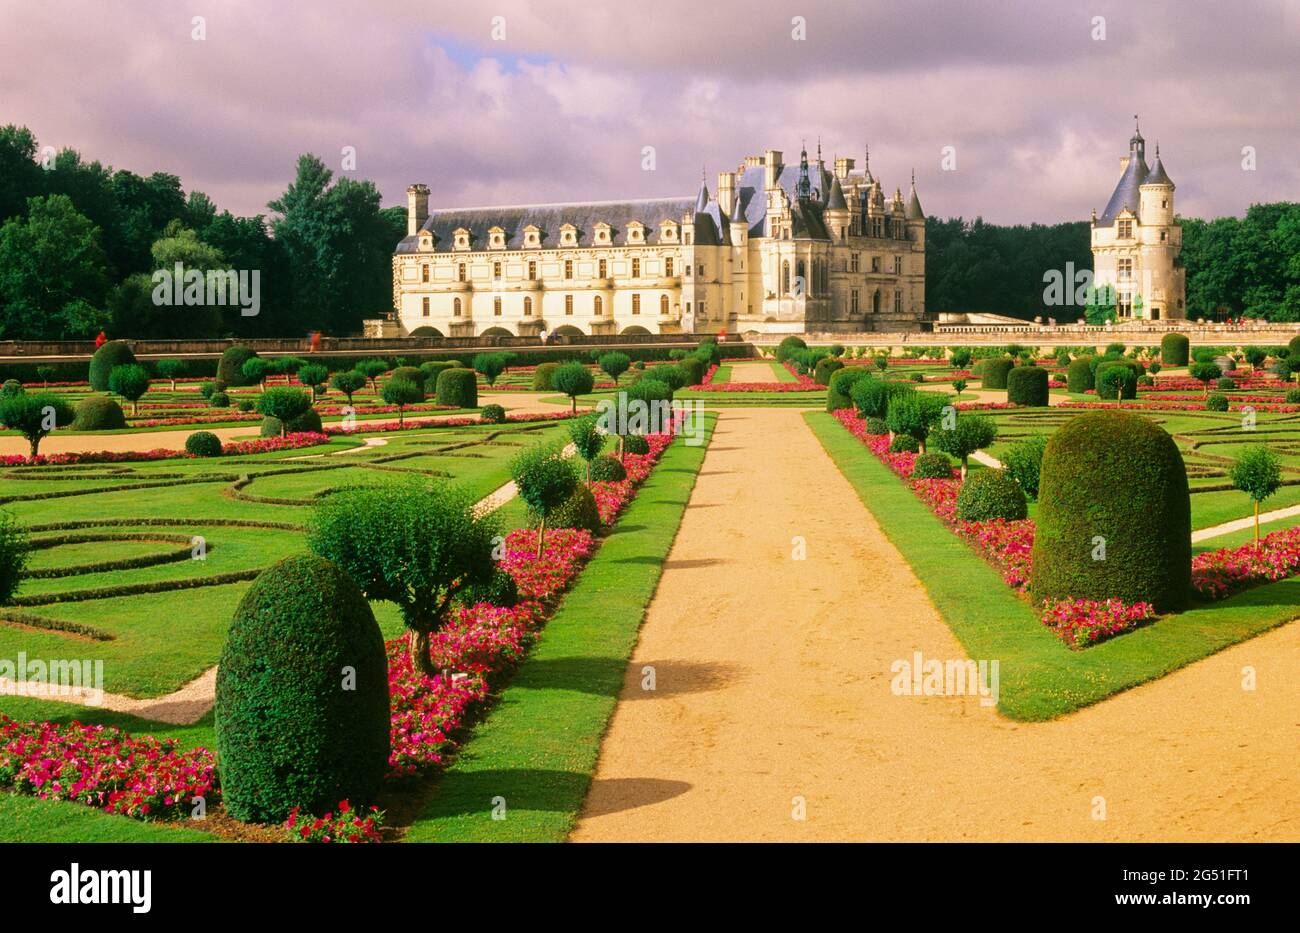 View of walkway in garden and Chateau Chenonceau, Loire River Valley, France Stock Photo